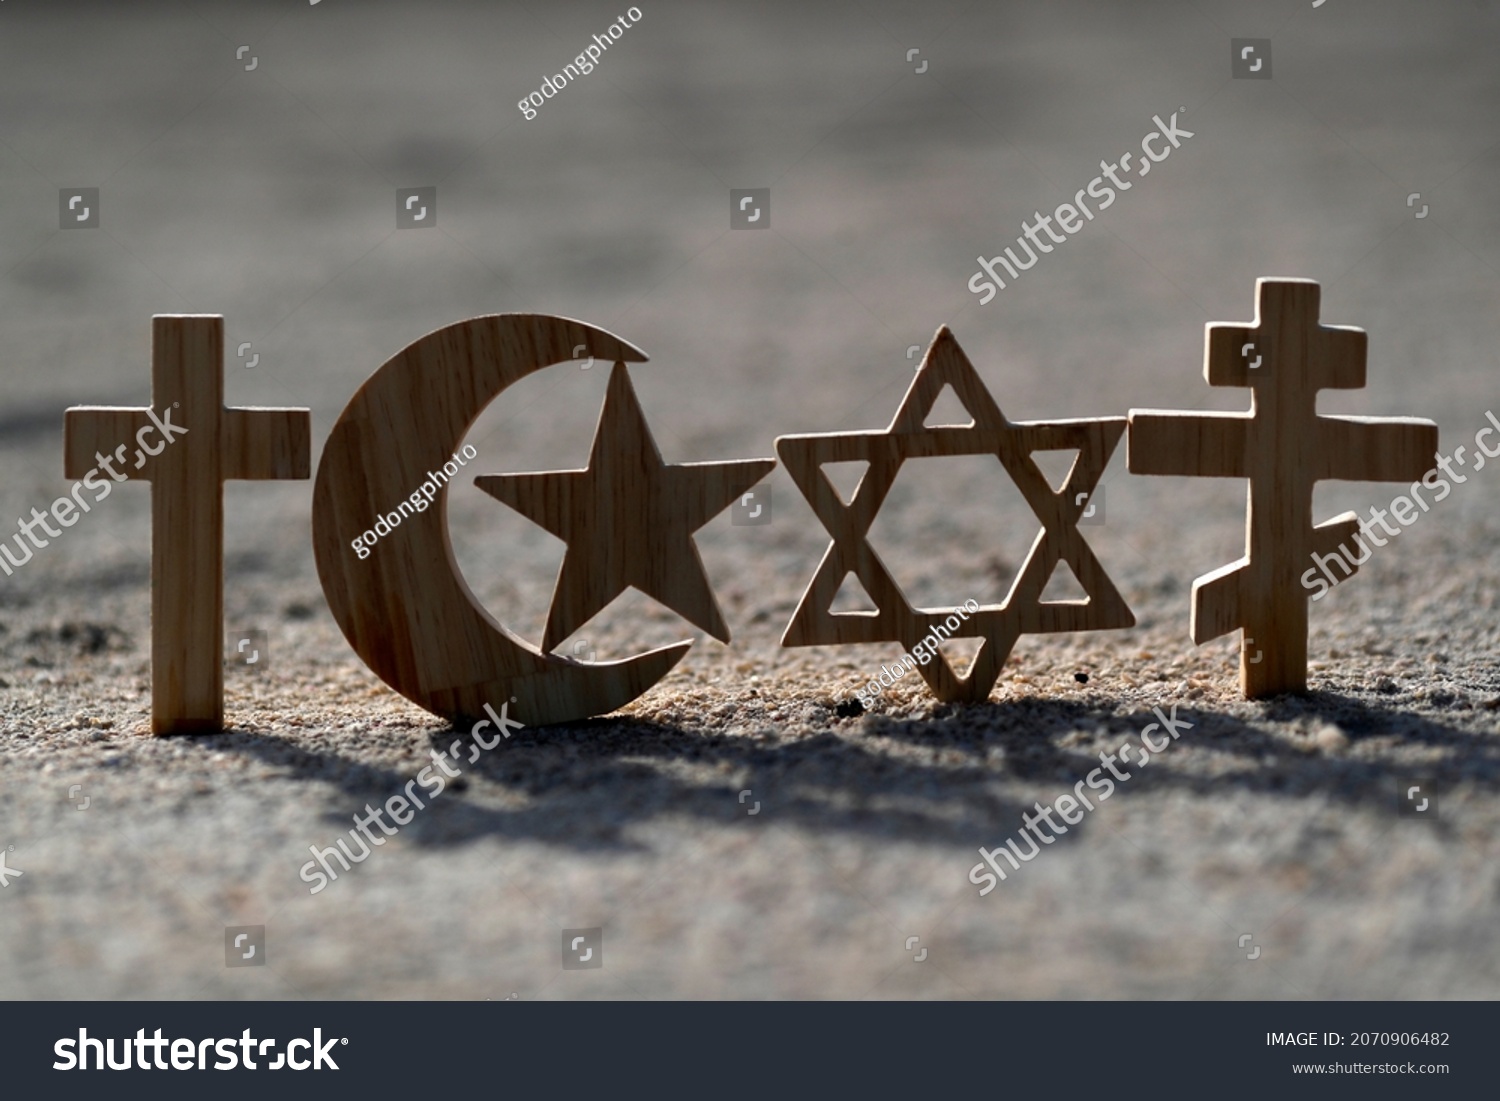 Christianity, Islam, Judaism 3 monotheistic religions. Jewish Star,  Christian and Orthodox crosses and Crescent and star : Interreligious or interfaith symbols. #2070906482